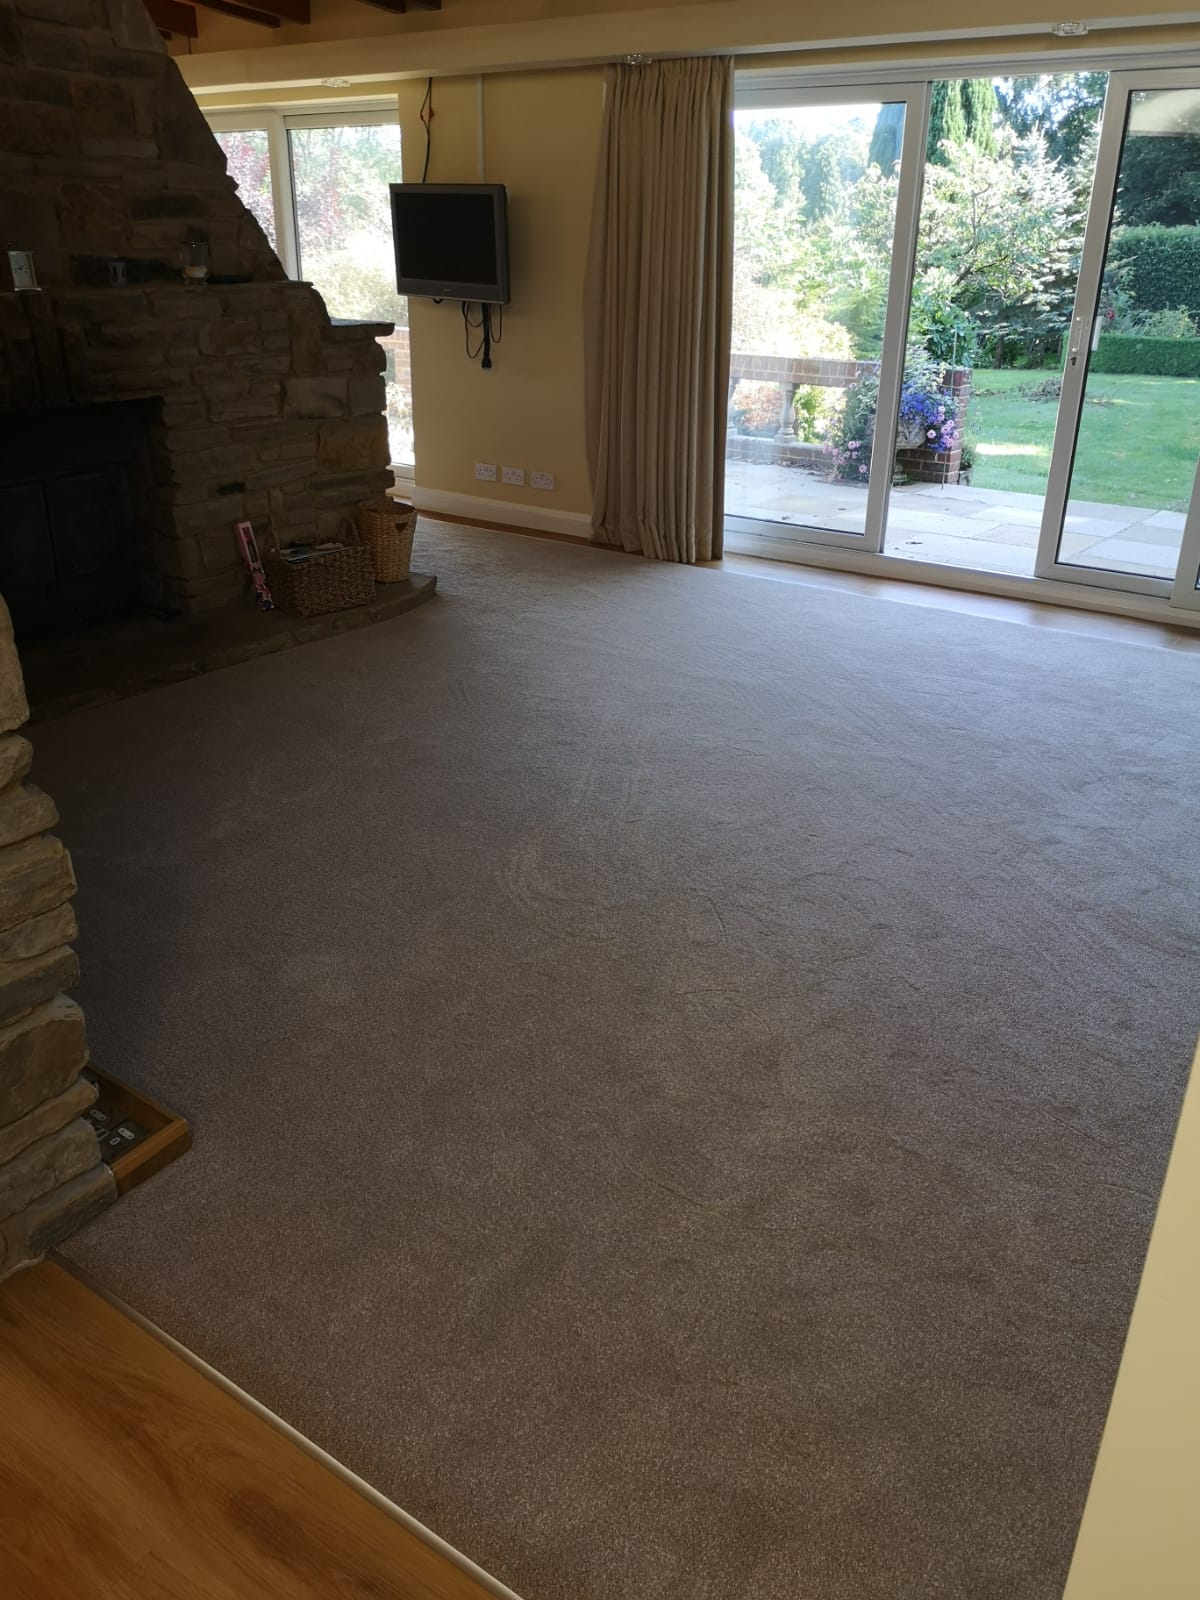 Previous Work from Melvin Head Carpets